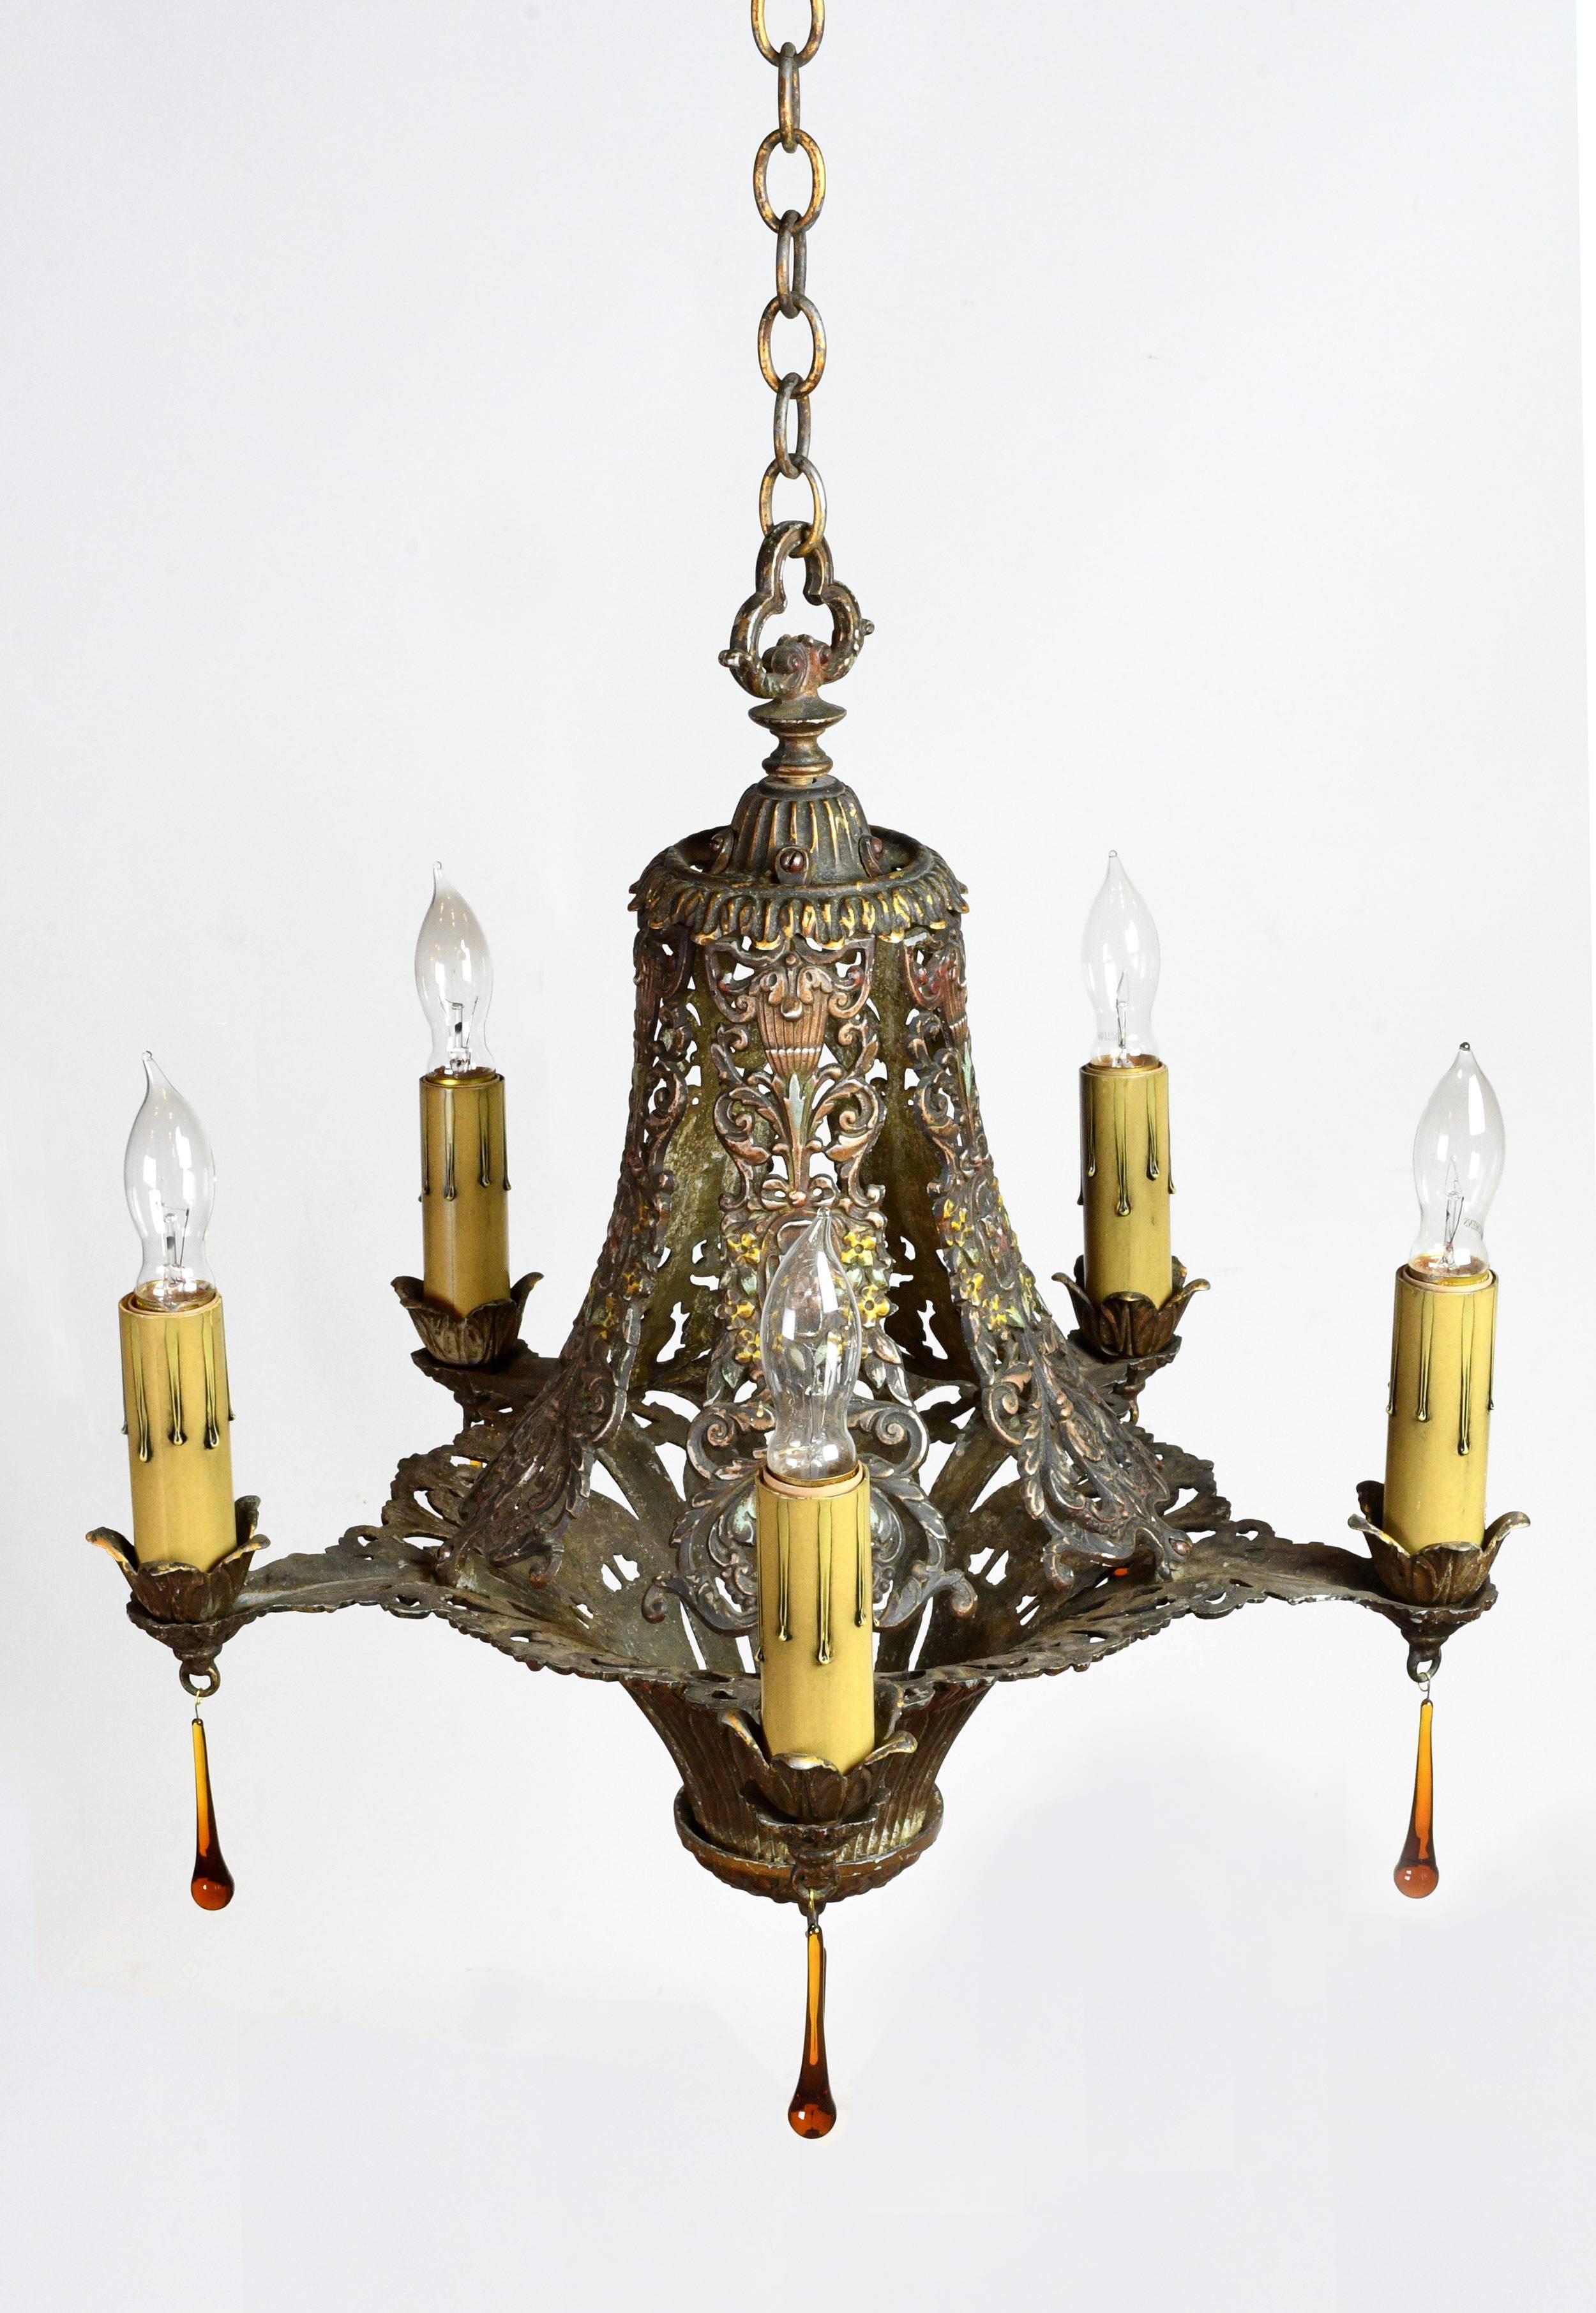 Aluminum Five Candle Polychrome Chandelier with Floral Details